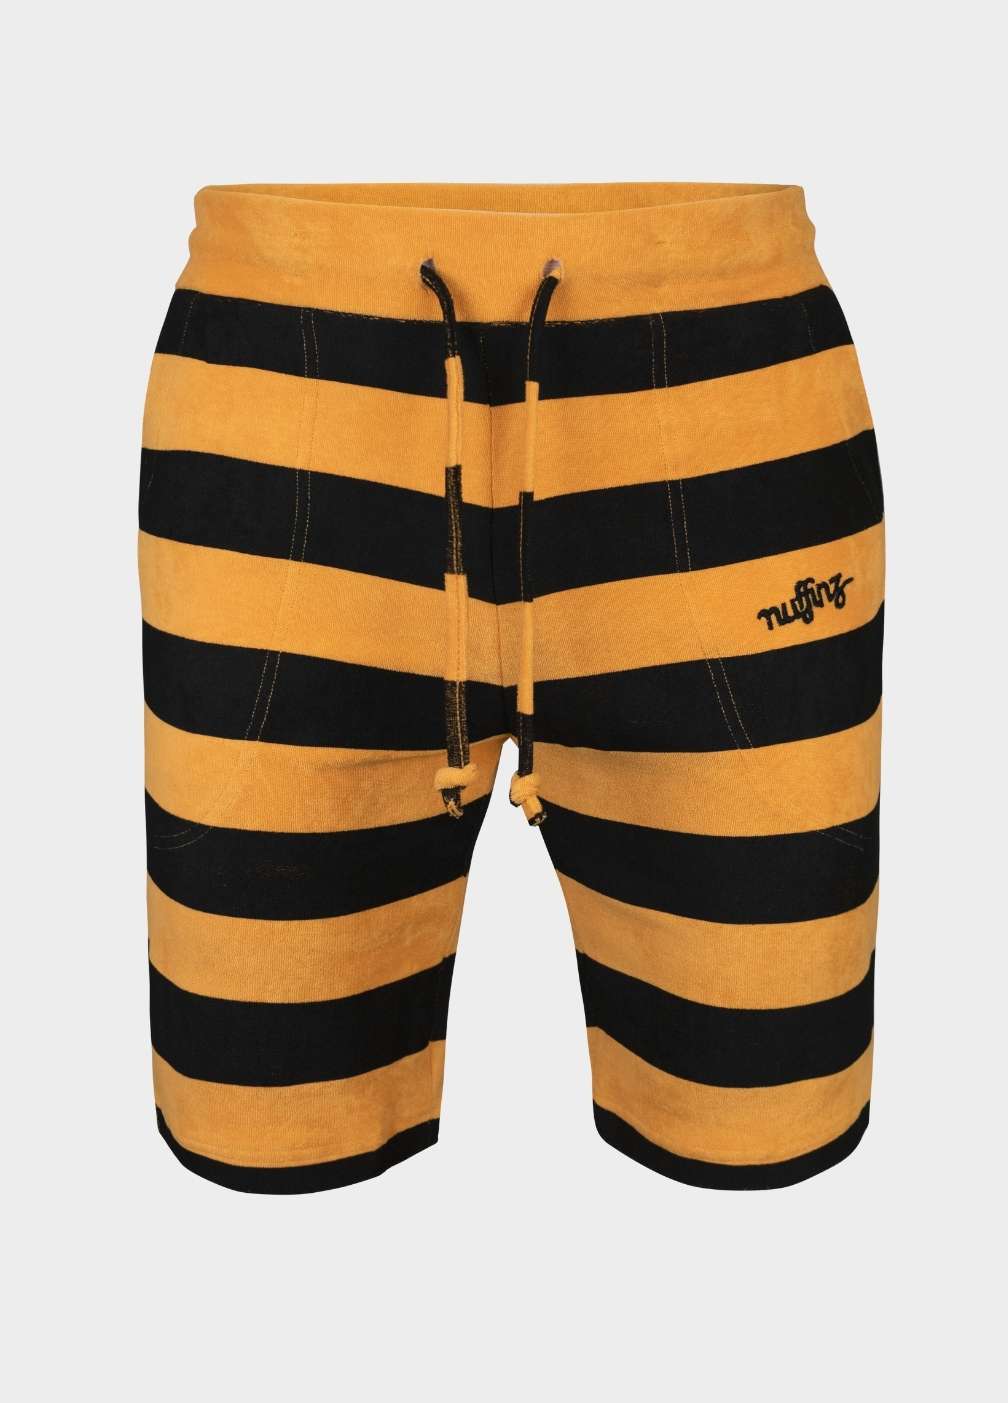 nuffinz menswear - shorts - golden nugget towel shorts st - 100% organic cotton - terry cloth - golden yellow striped